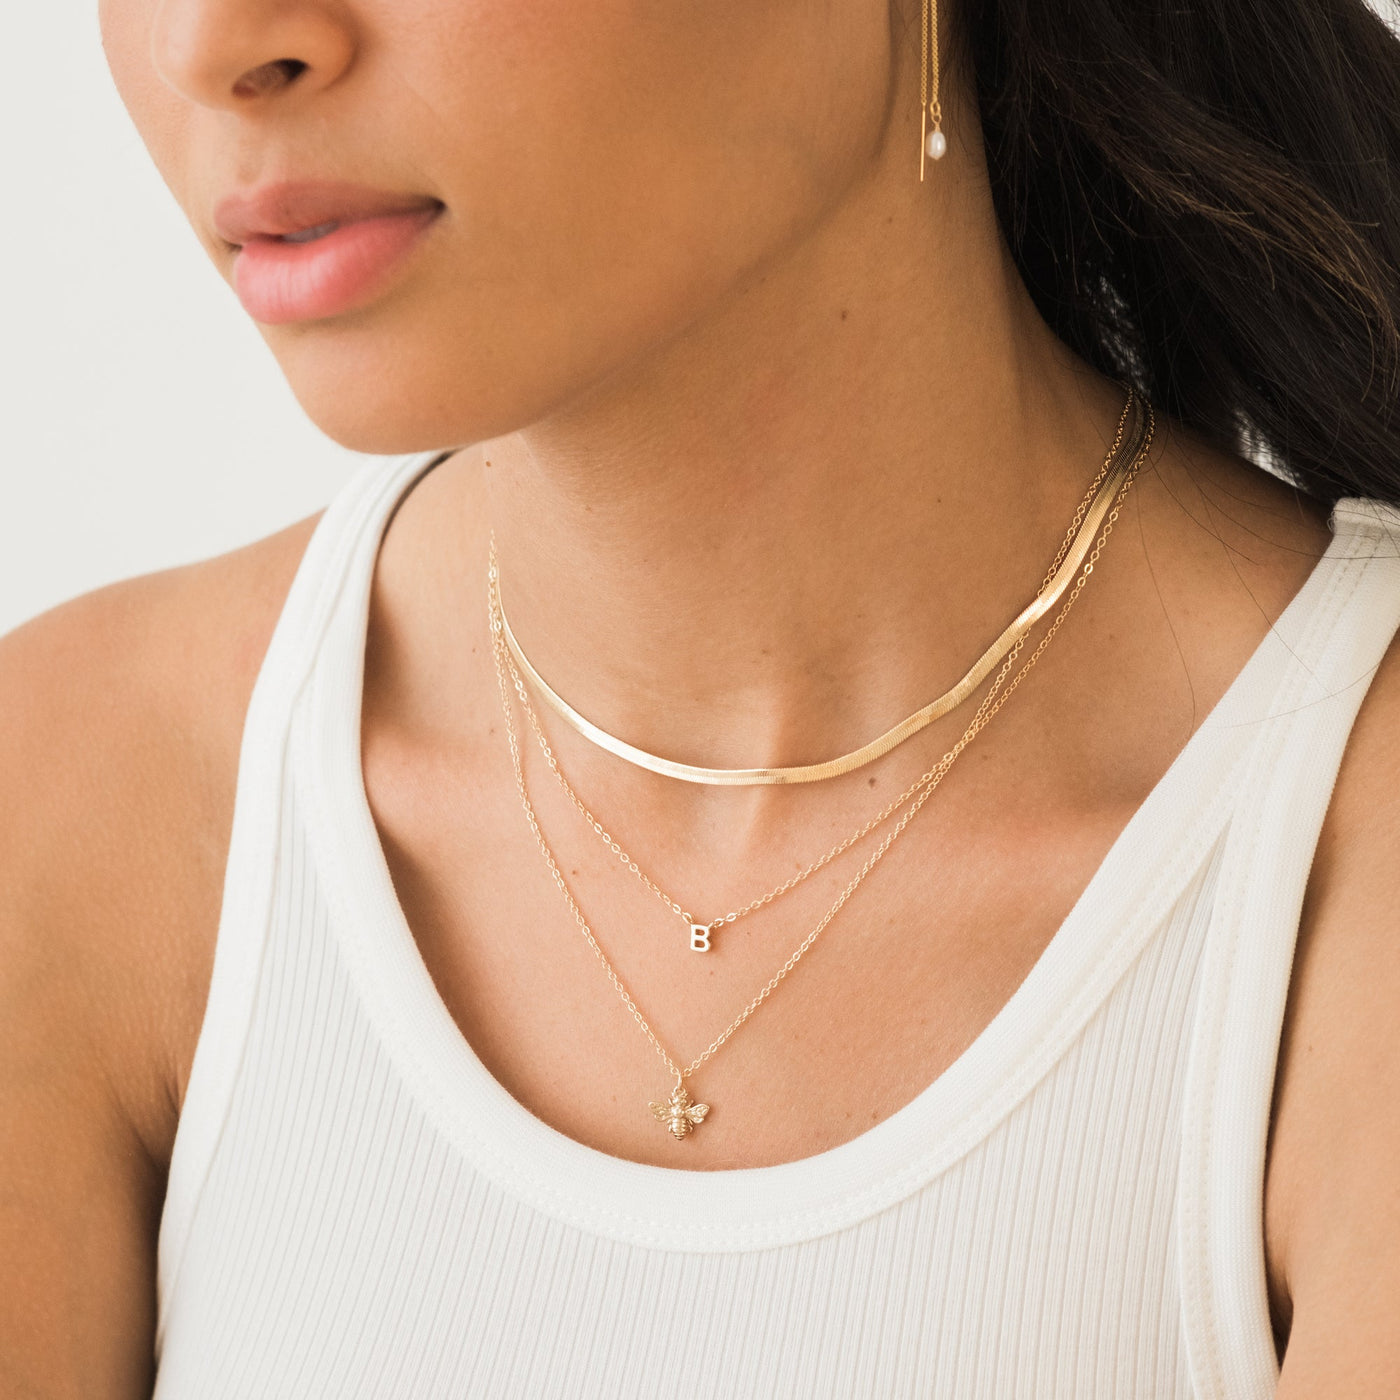 Honey Bee Necklace | Simple & Dainty Jewelry